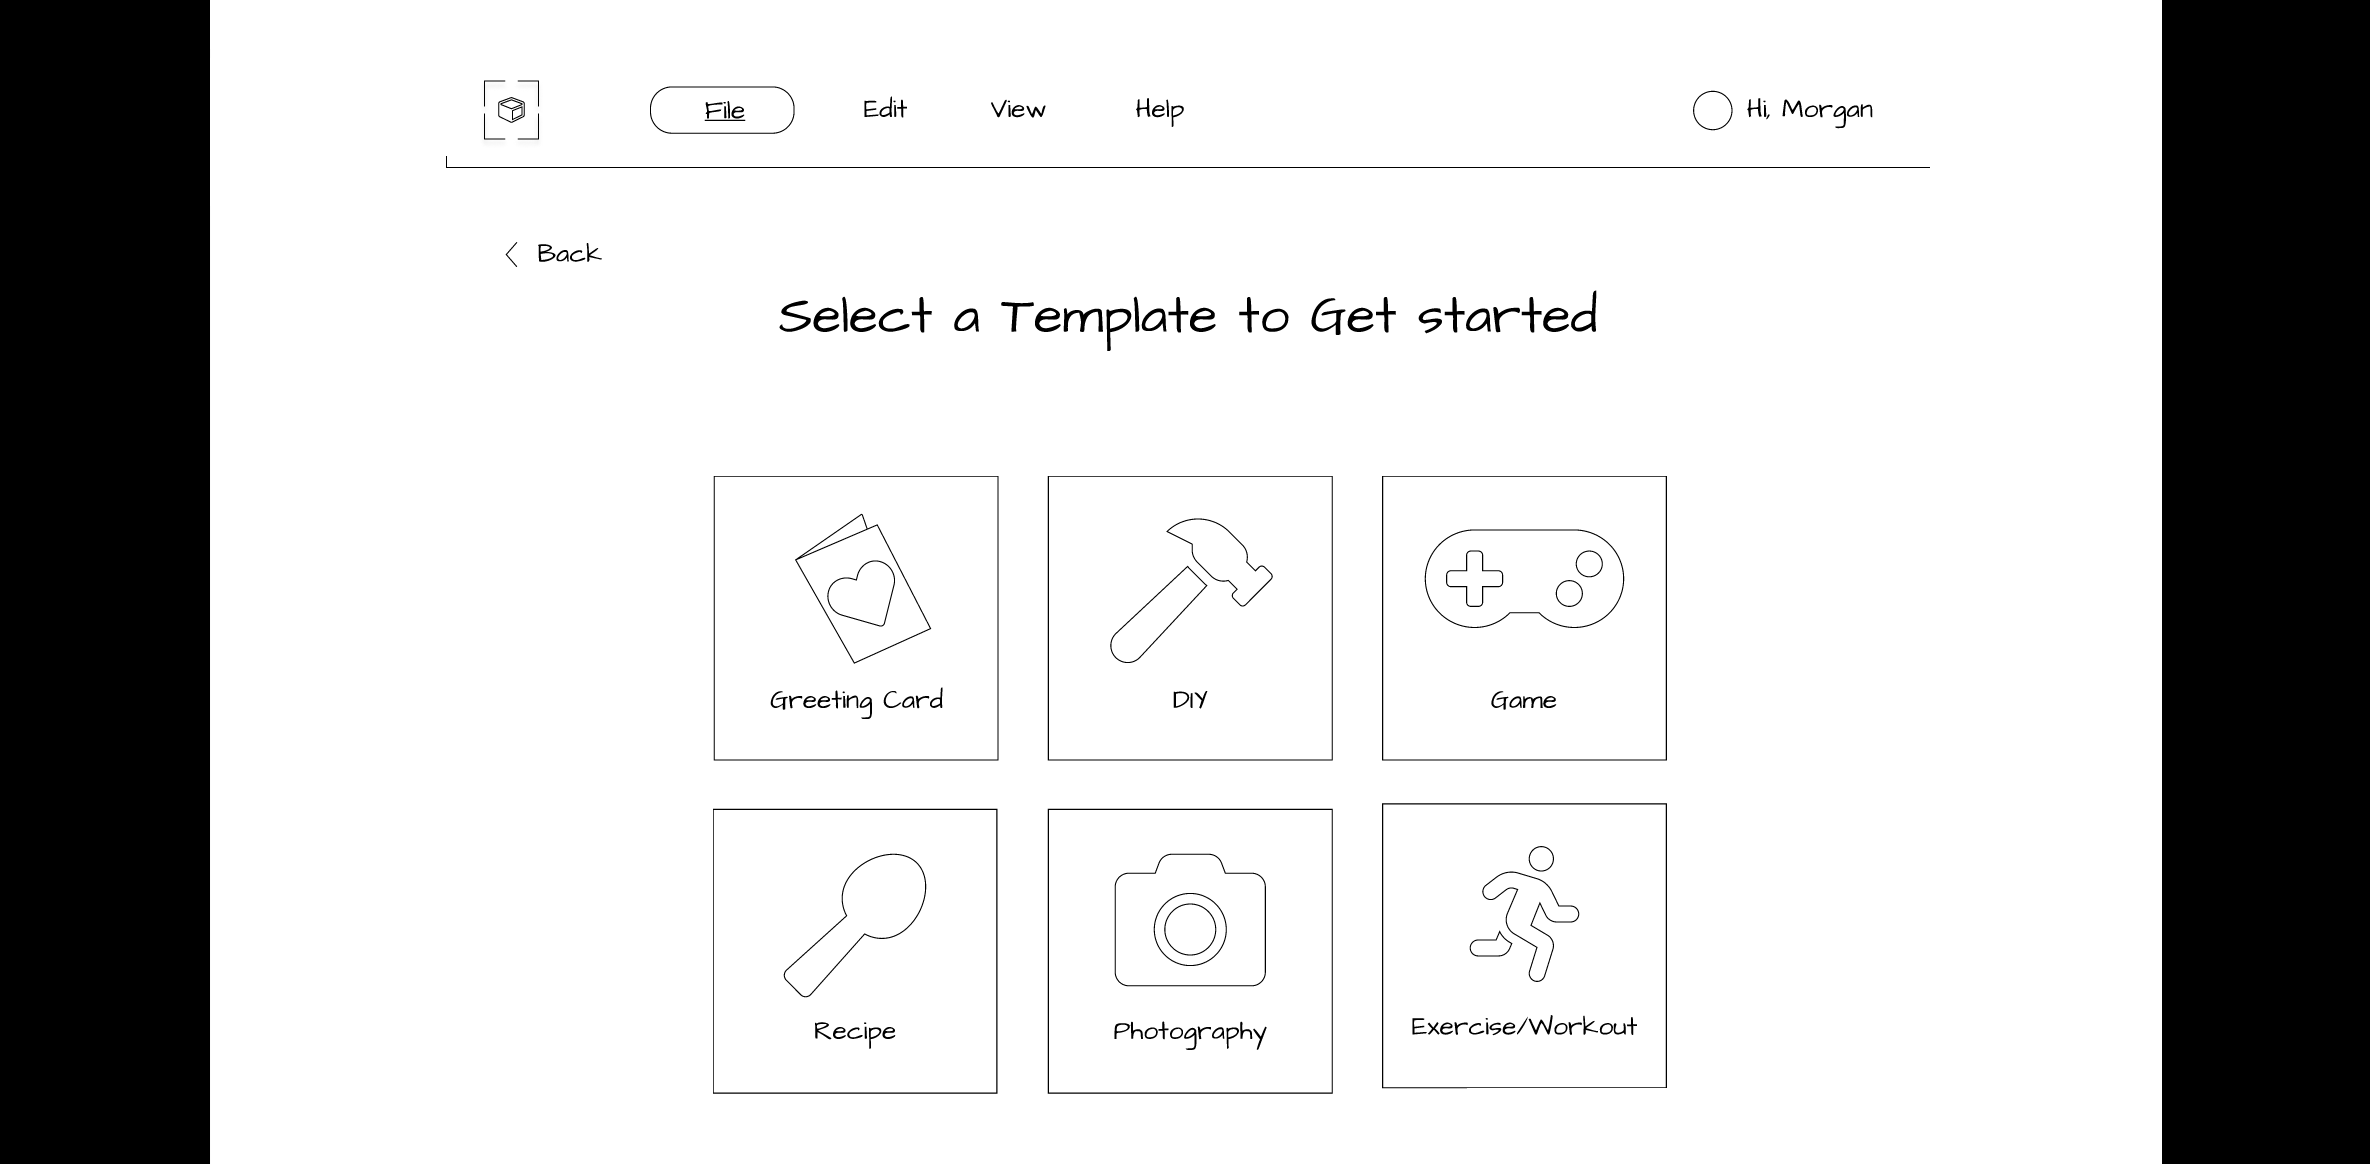 Select a template: Create a Greeting Card